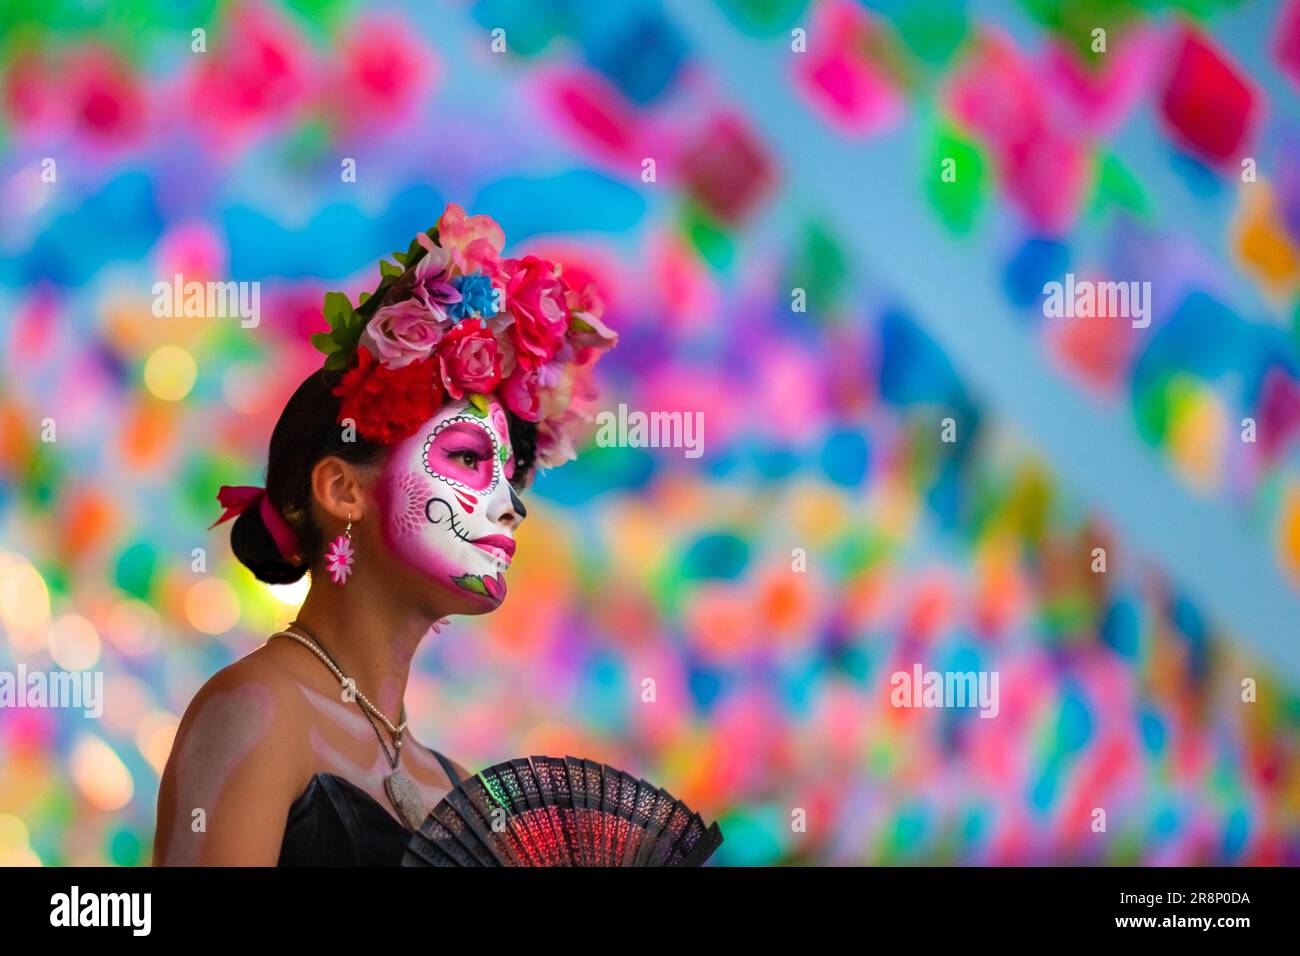 A young Mexican woman, dressed as La Catrina and fanning herself with a handfan, takes part in the Day of the Dead festivities in Tlaquepaque, Mexico. Stock Photo